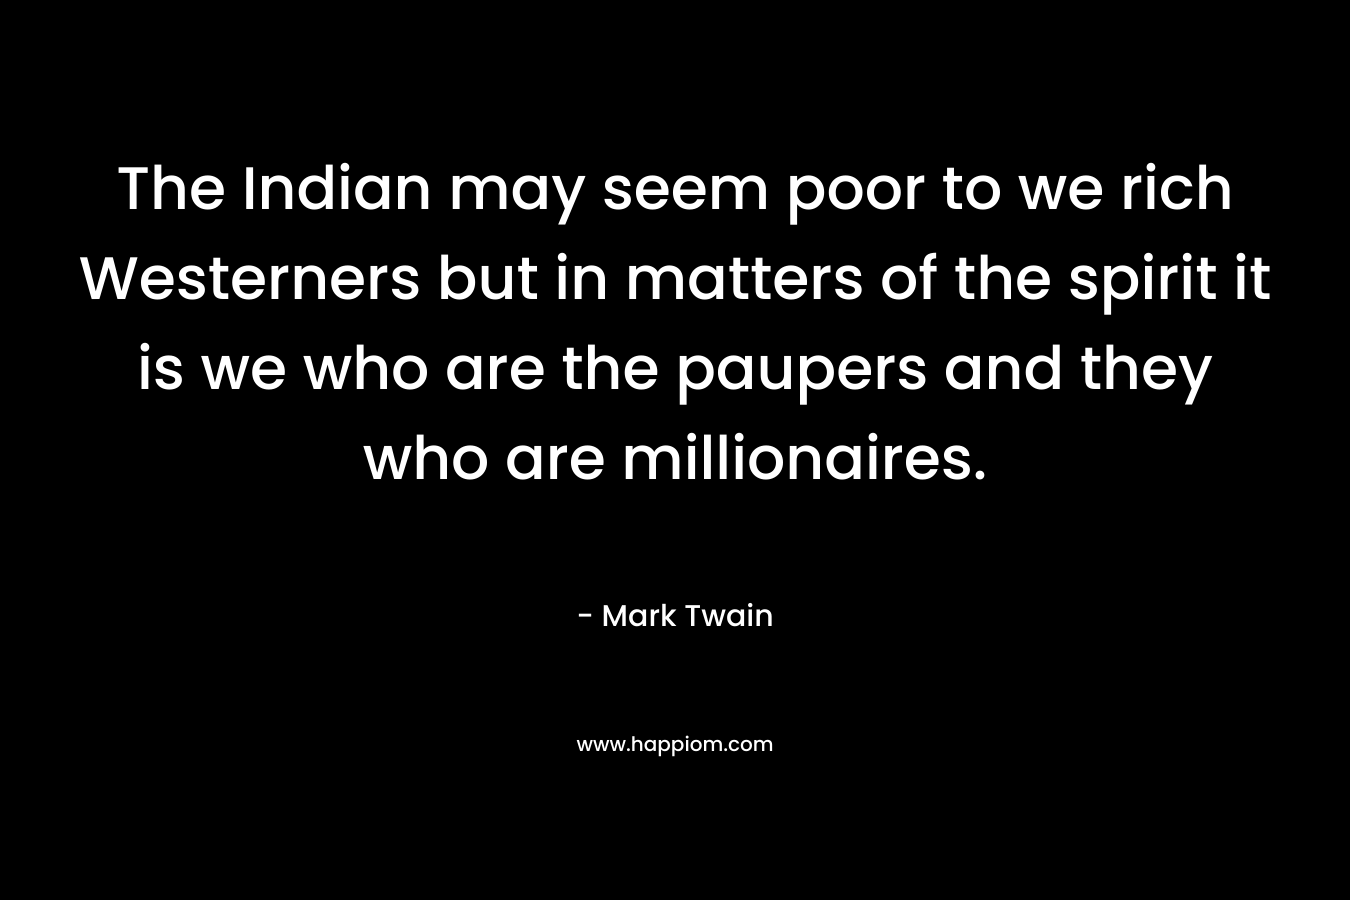 The Indian may seem poor to we rich Westerners but in matters of the spirit it is we who are the paupers and they who are millionaires. – Mark Twain